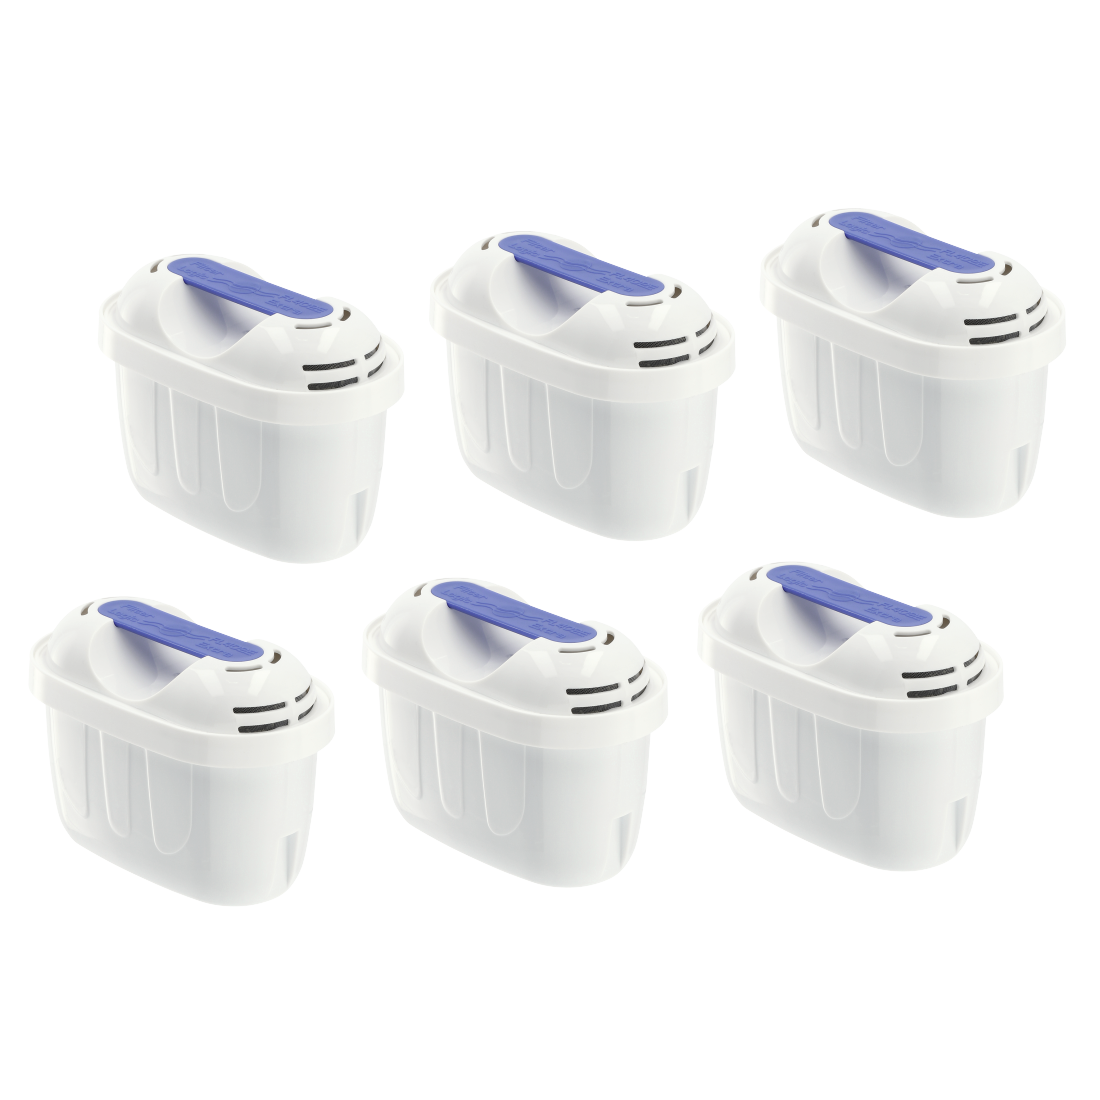 abx2 High-Res Image 2 - Xavax, Water Filter Cartridges, 6-Pack